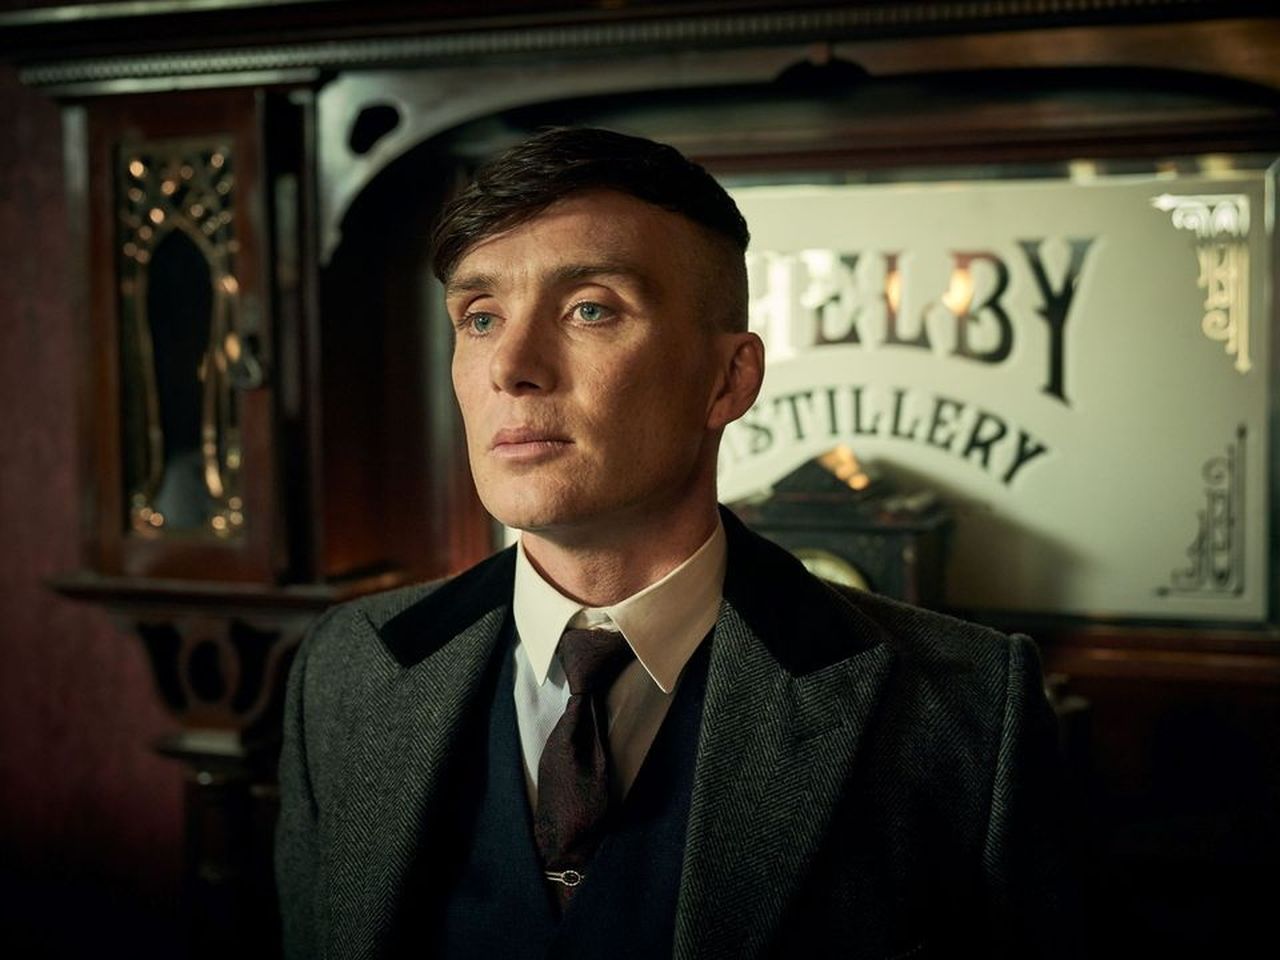 Cillian Murphy says he disappoints Peaky Blinders fans as he's nothing like  Tommy Shelby - SundayWorld.com